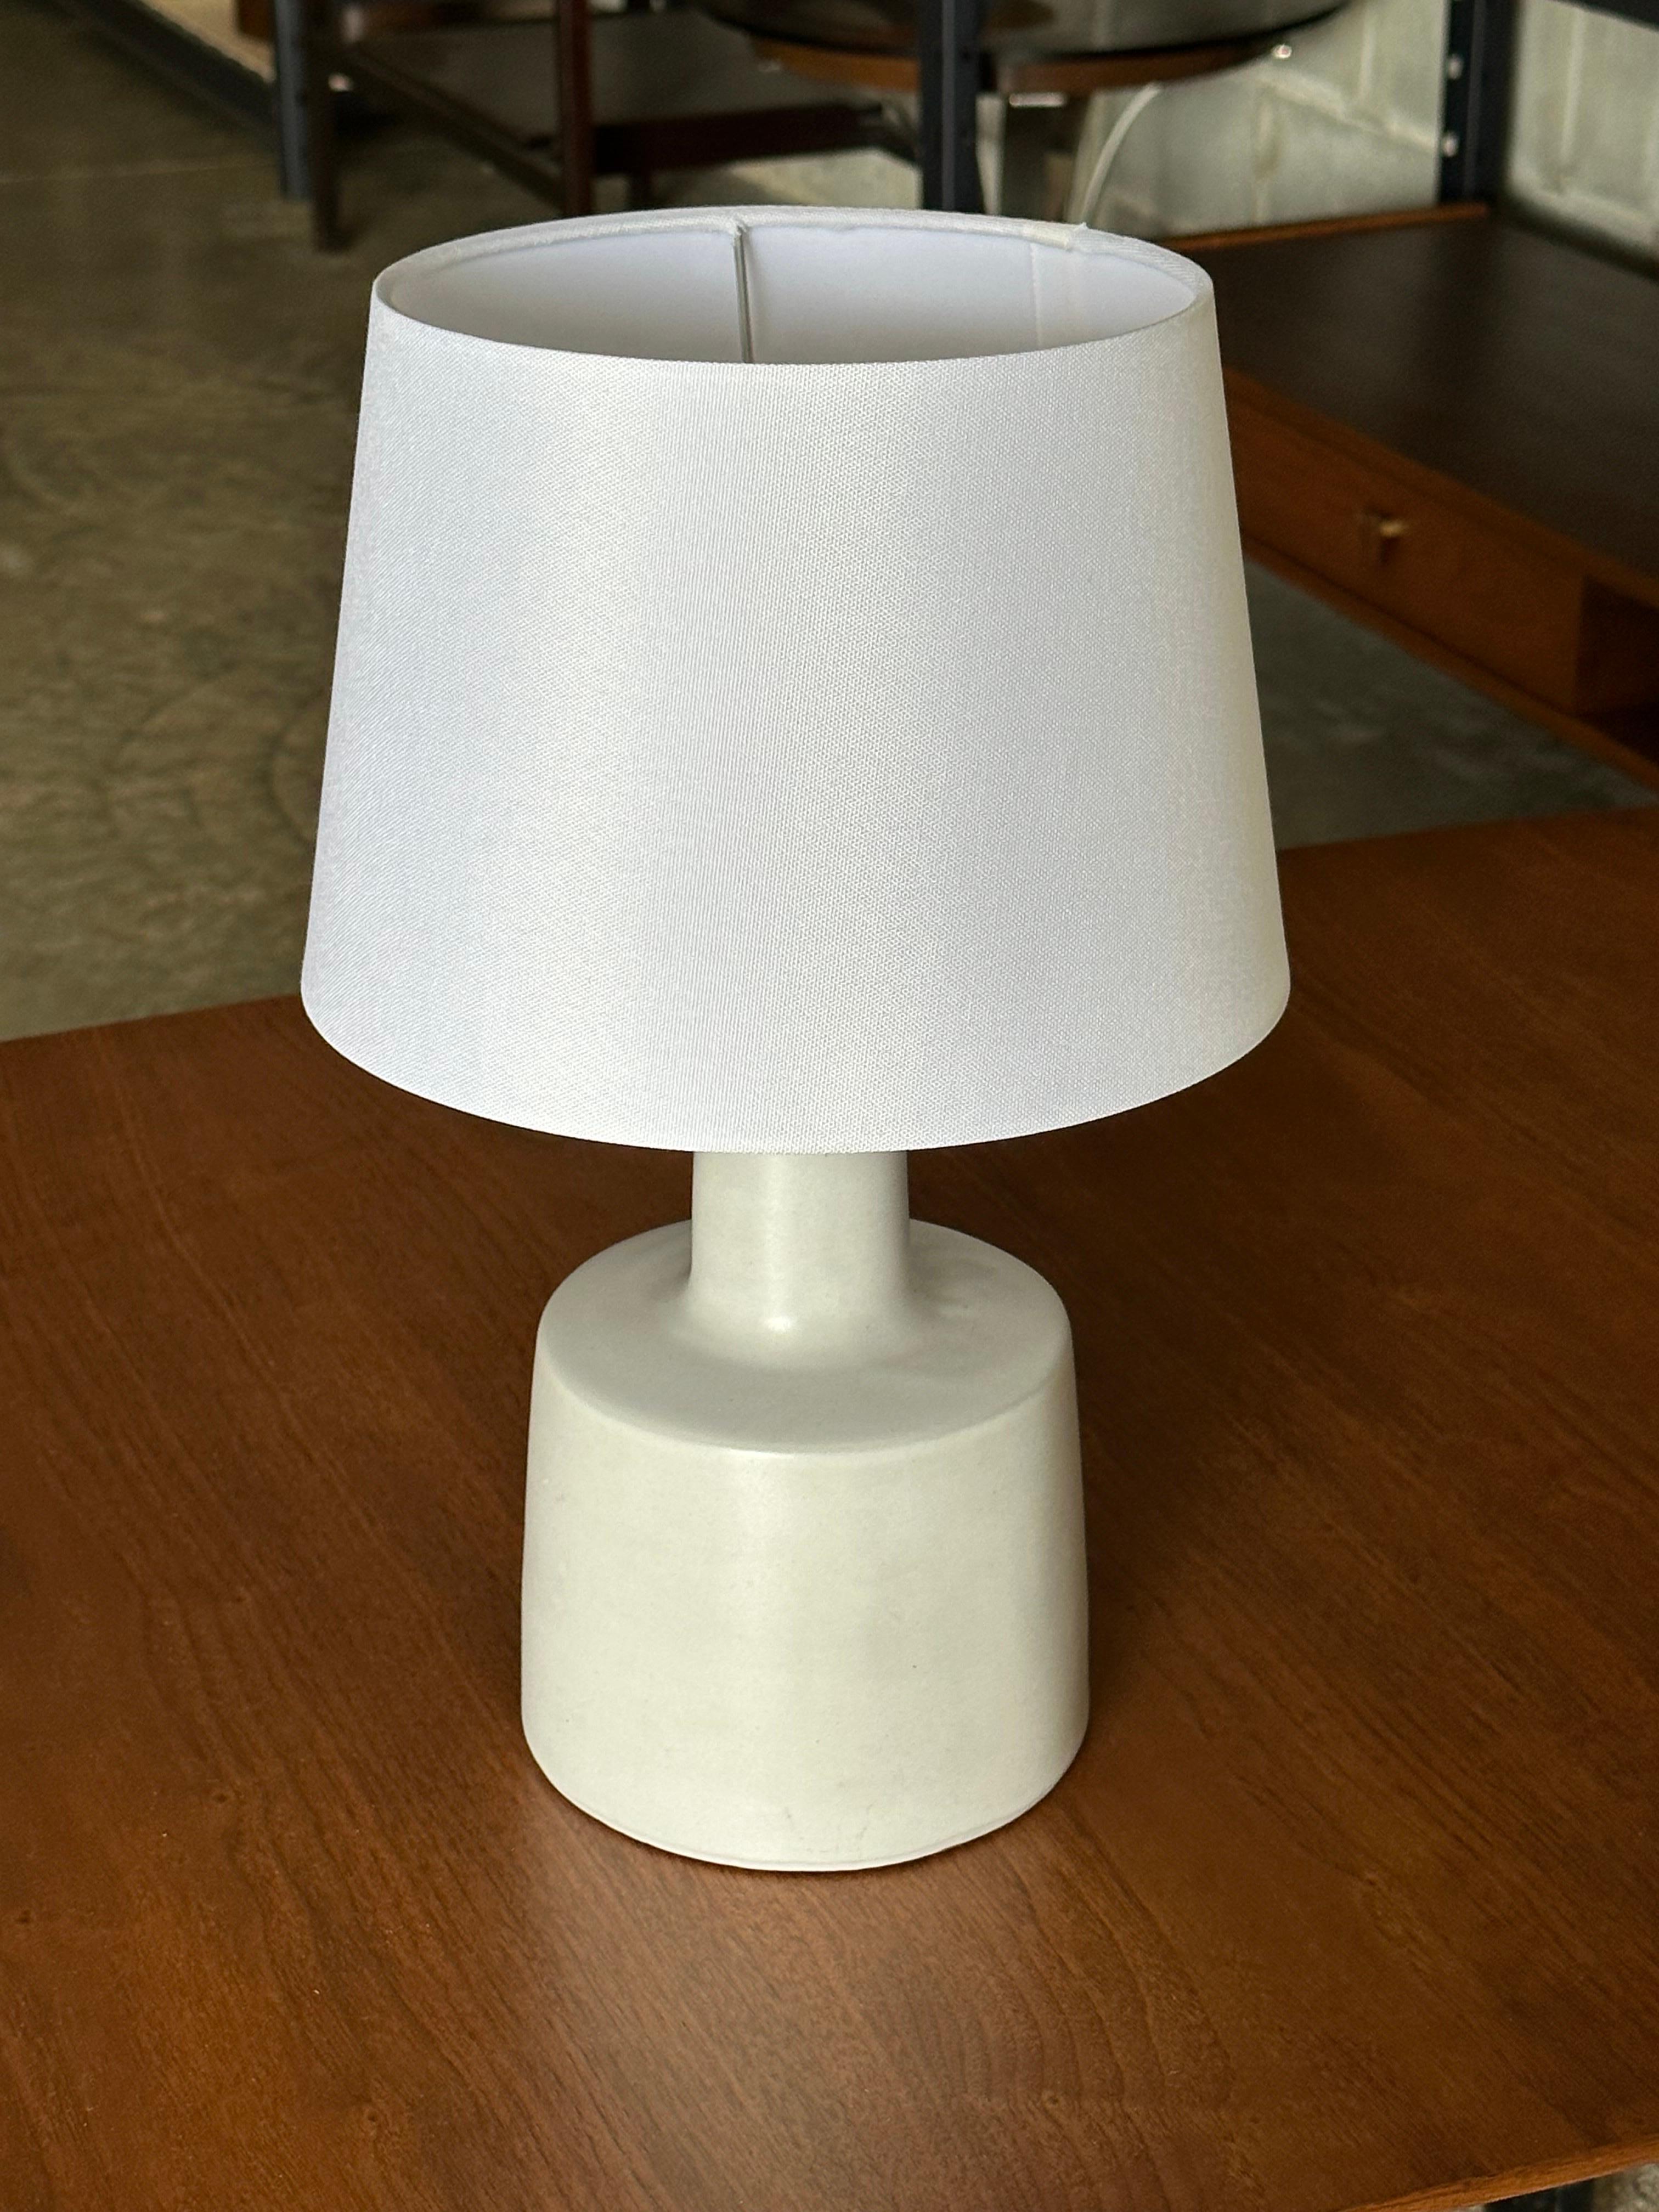 Jane and Gordon Martz Minimalist Ceramic Table Lamp In Good Condition For Sale In St.Petersburg, FL